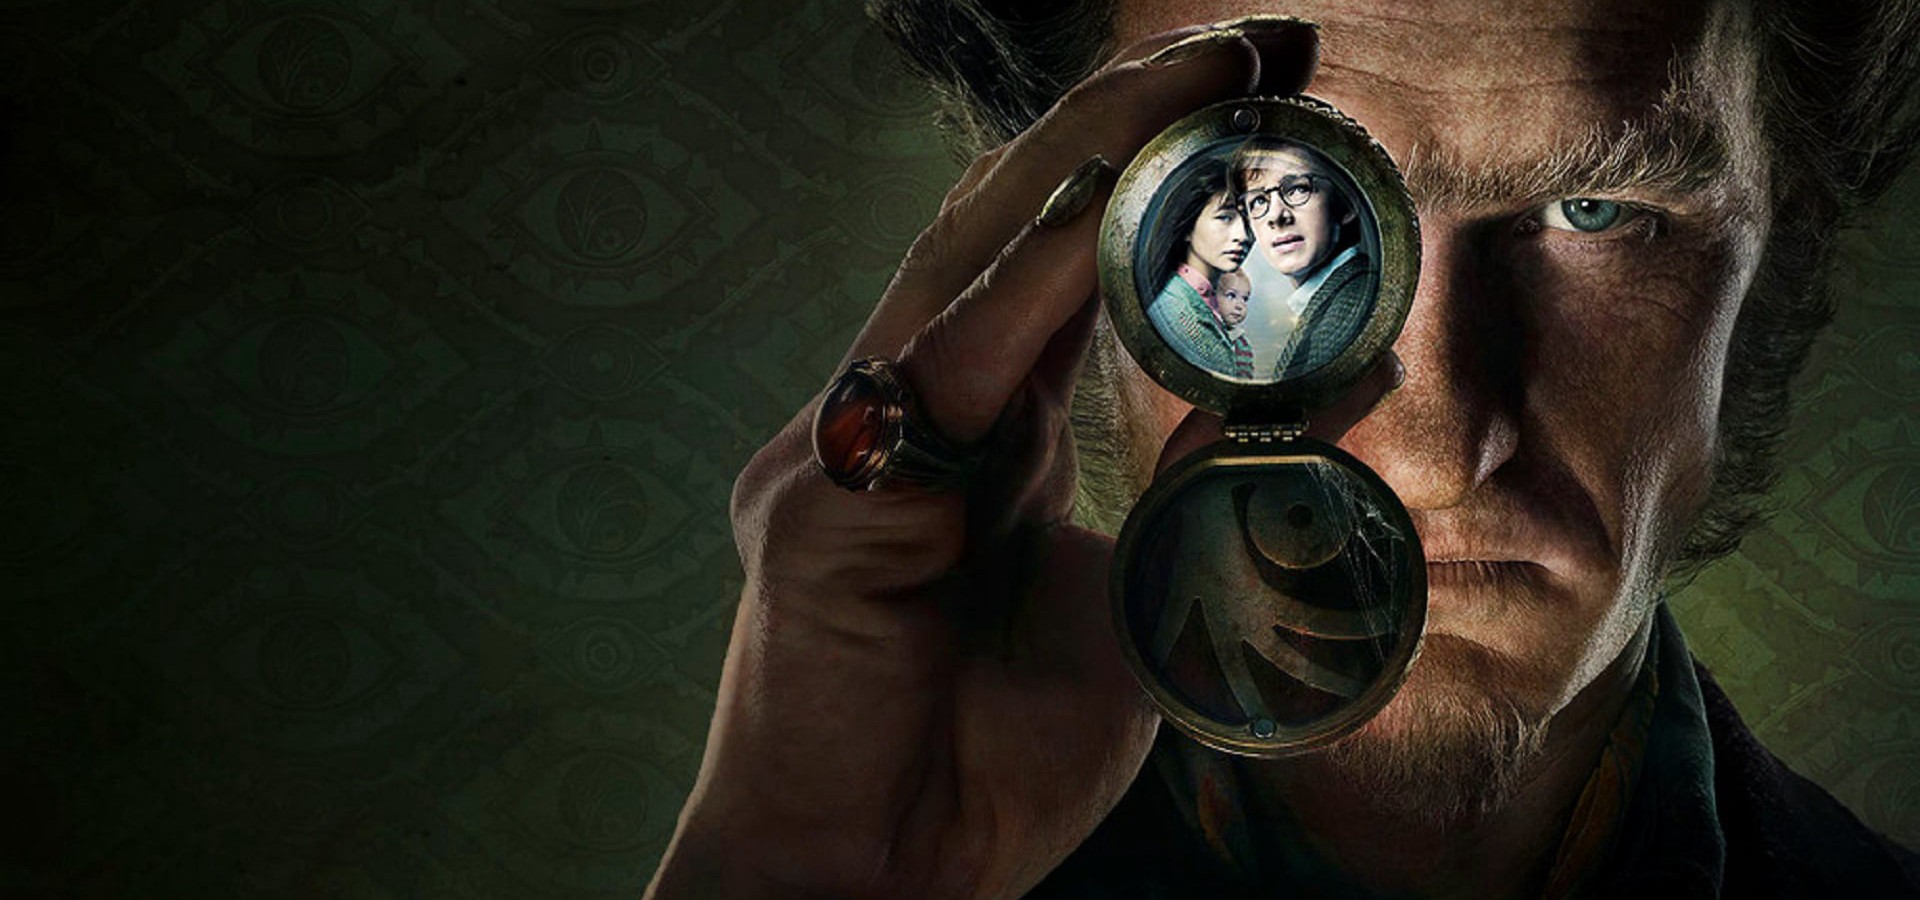 A Series of Unfortunate Events Season 2 streaming online